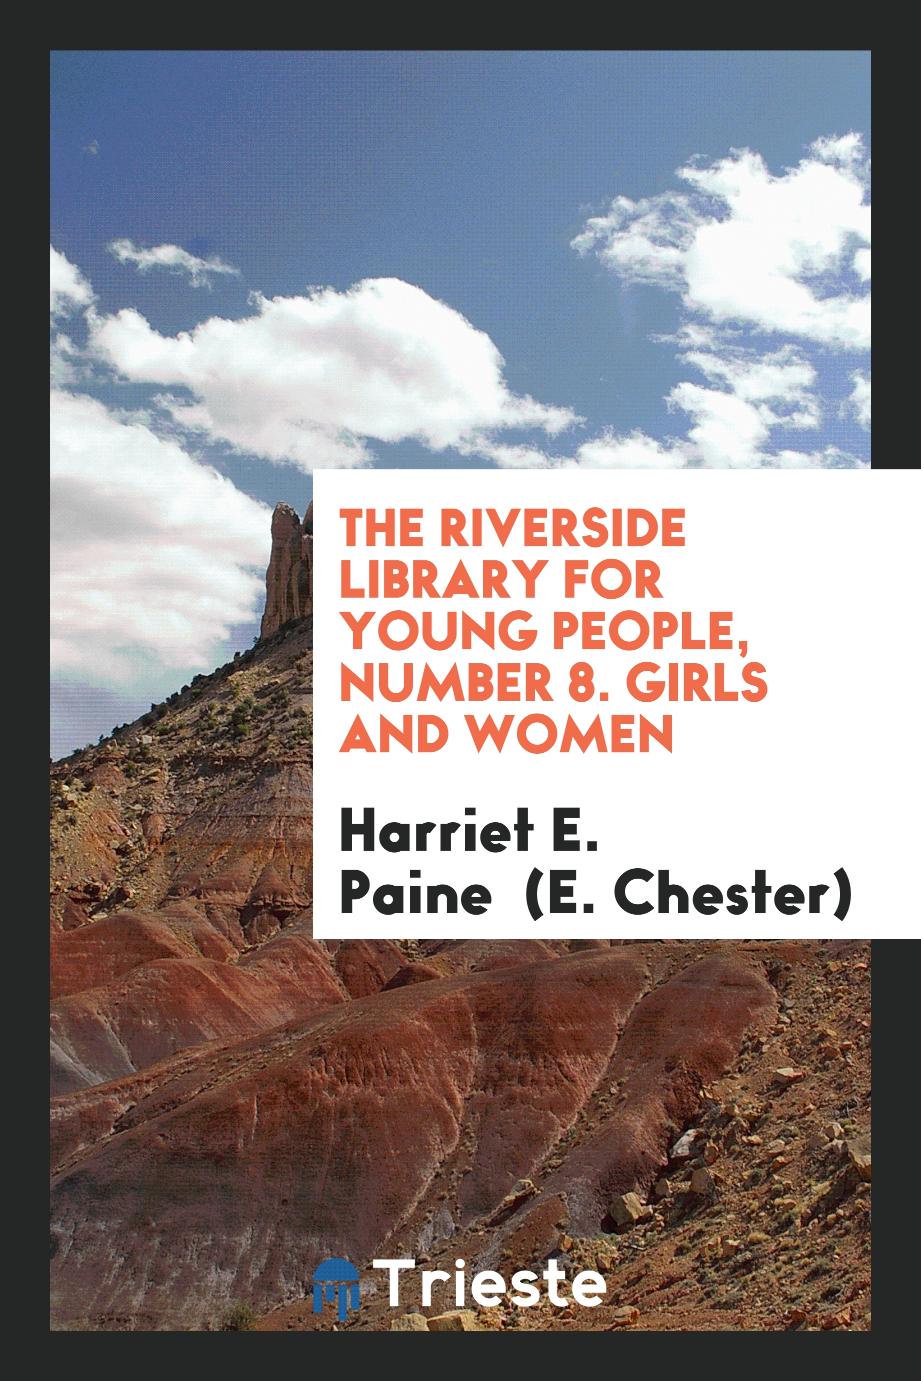 The Riverside Library for Young People, Number 8. Girls and Women